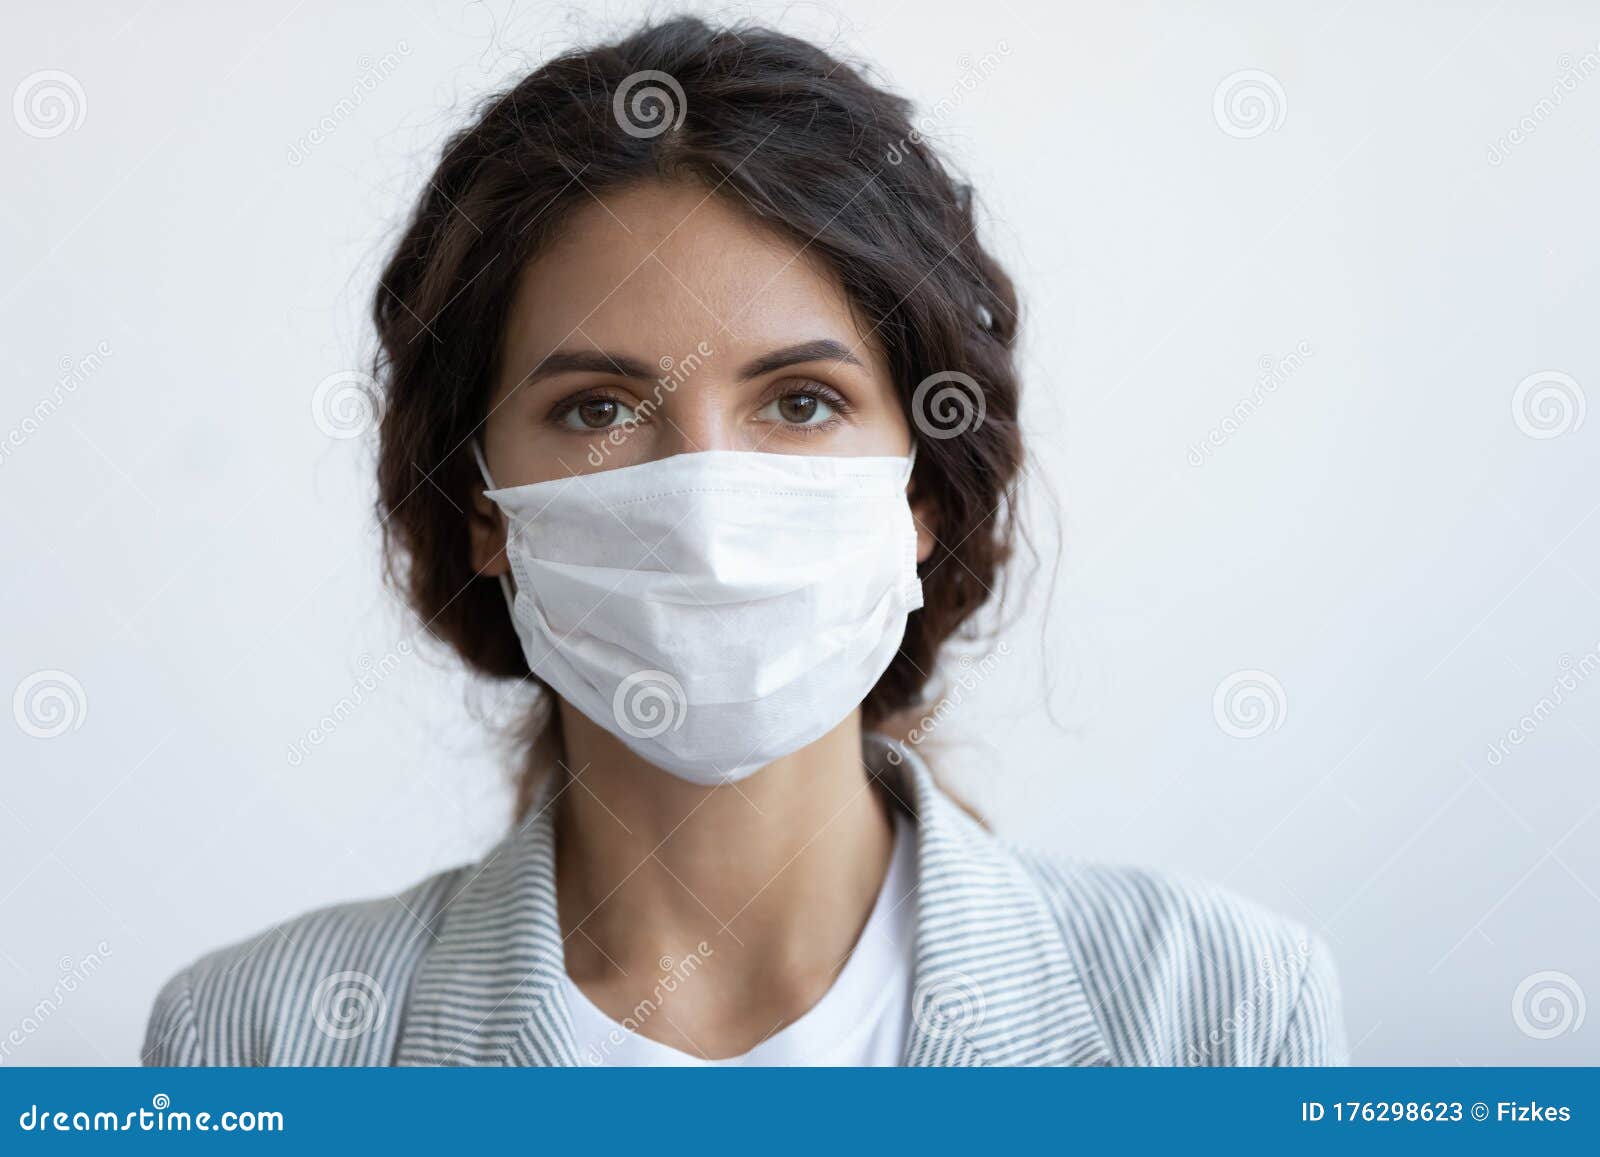 headshot portrait woman wear face mask protecting from covid19